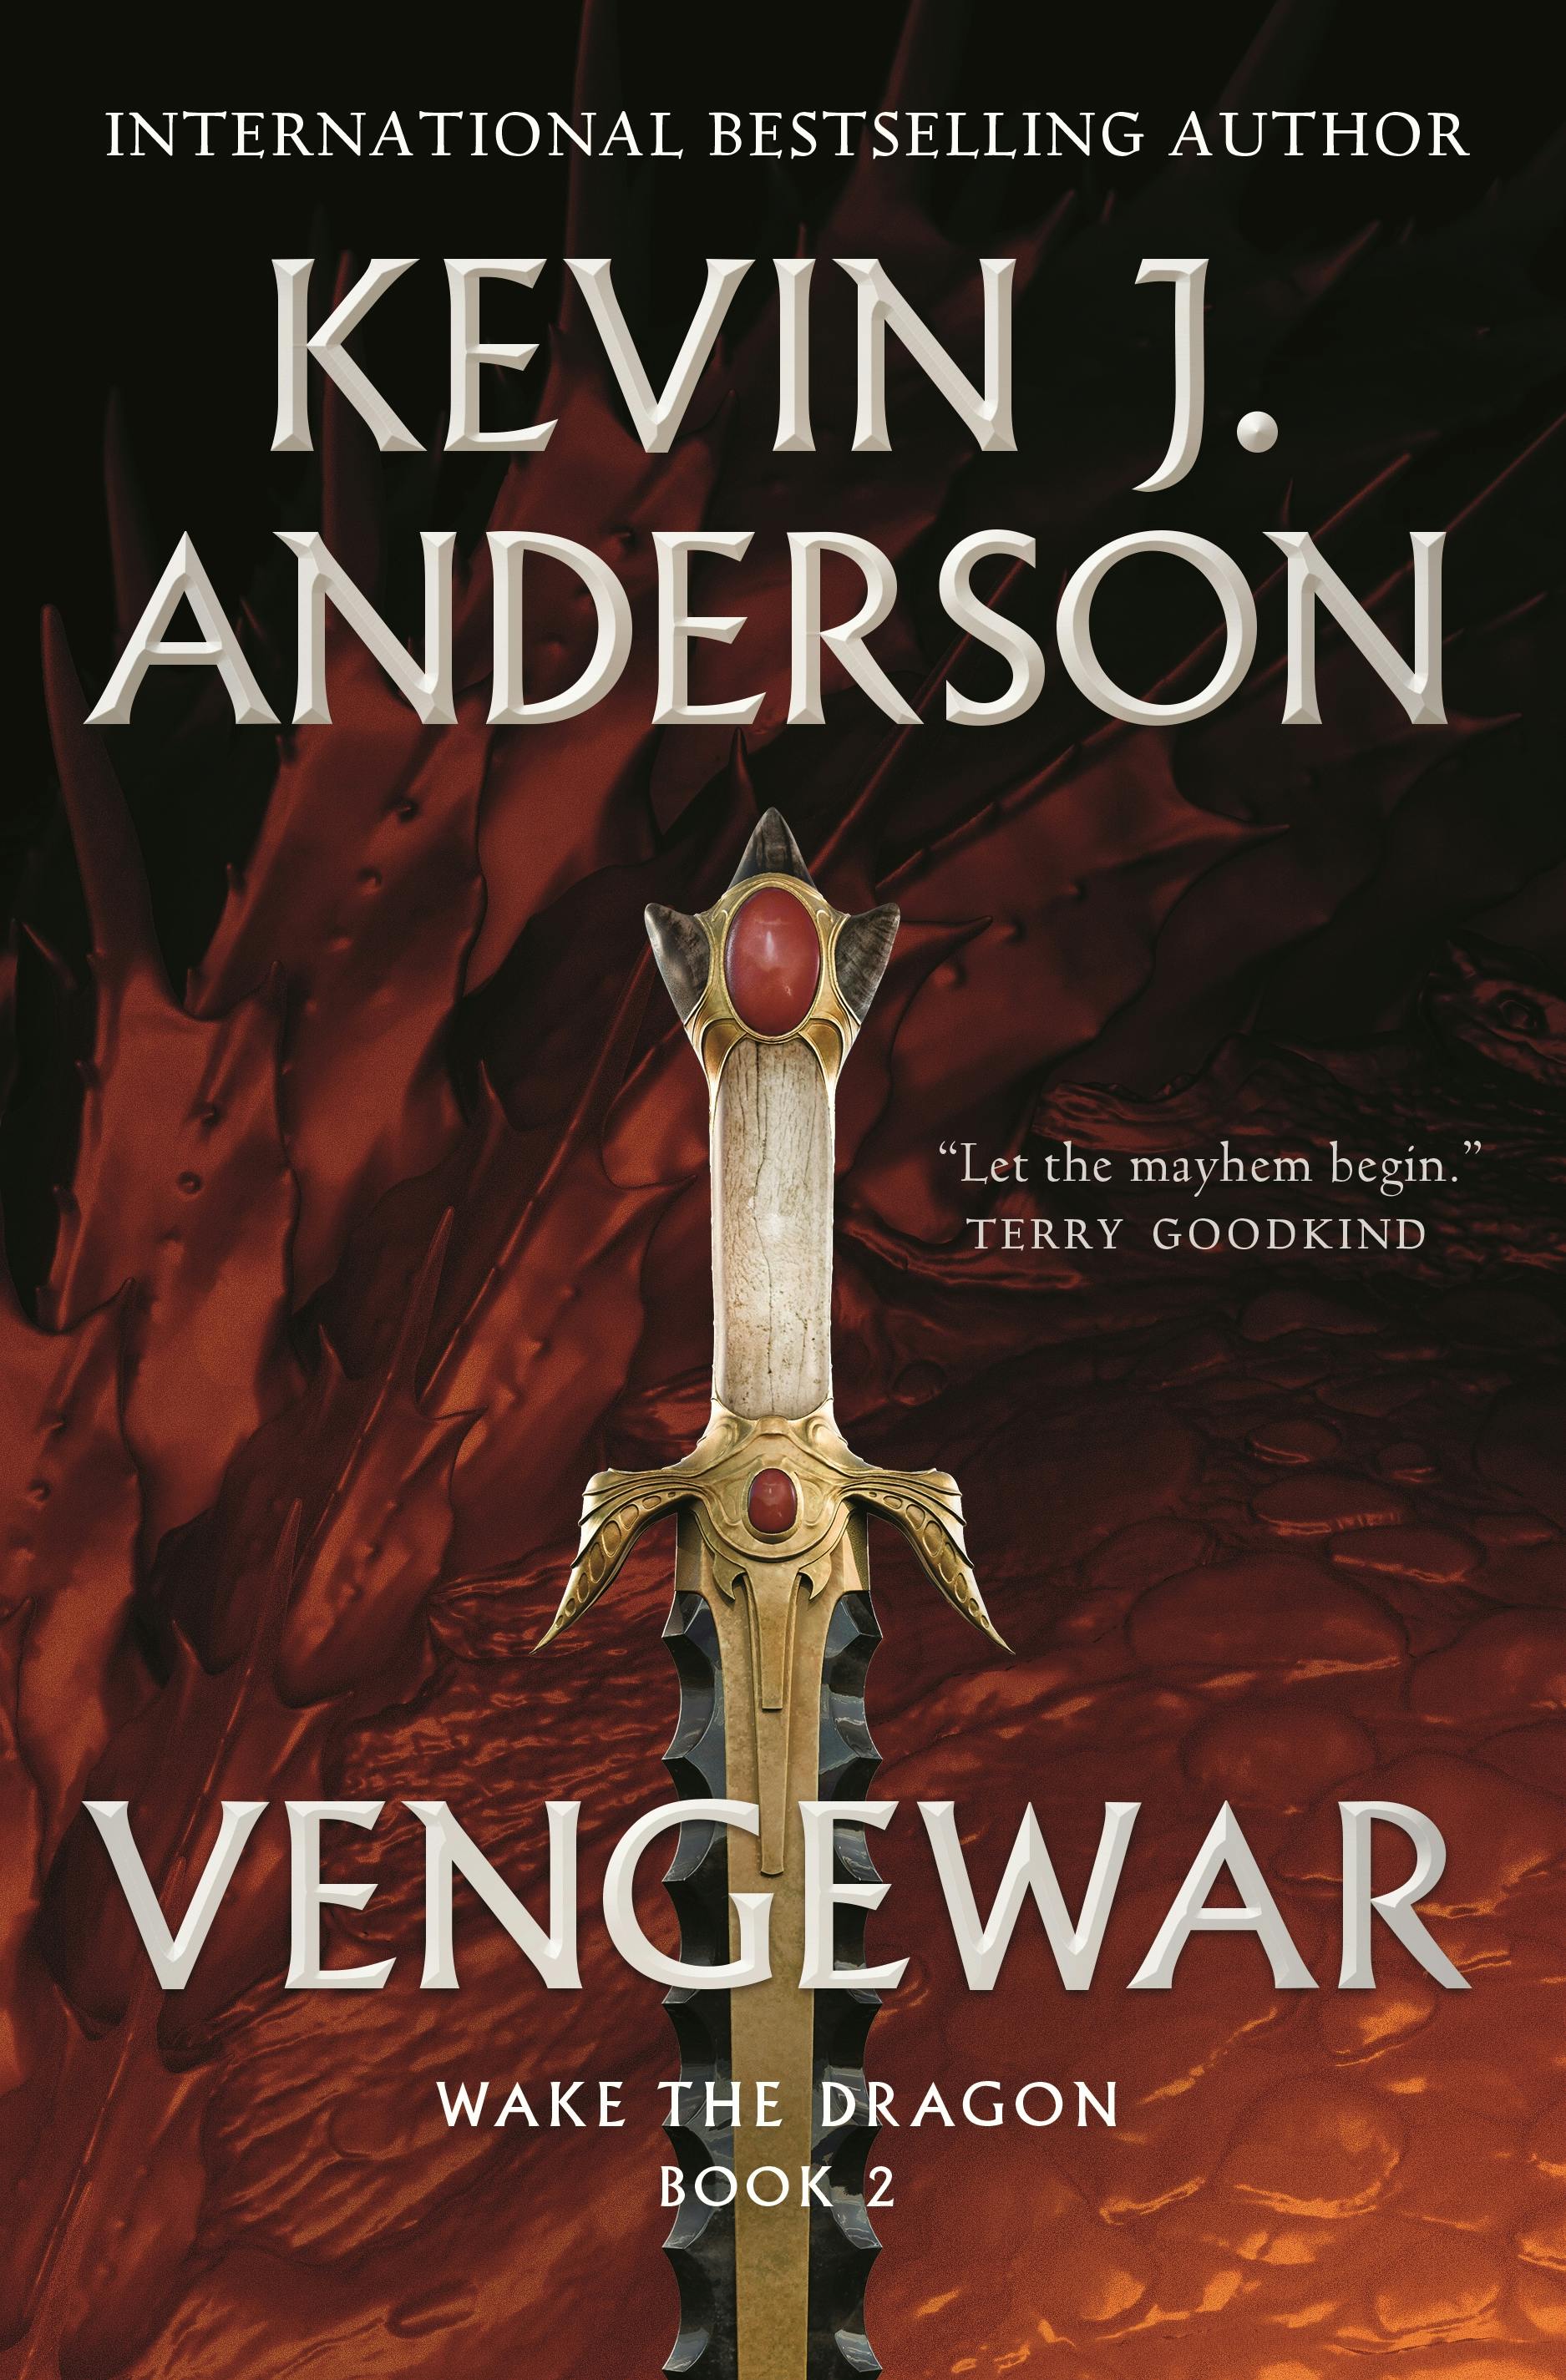 Cover for the book titled as: Vengewar